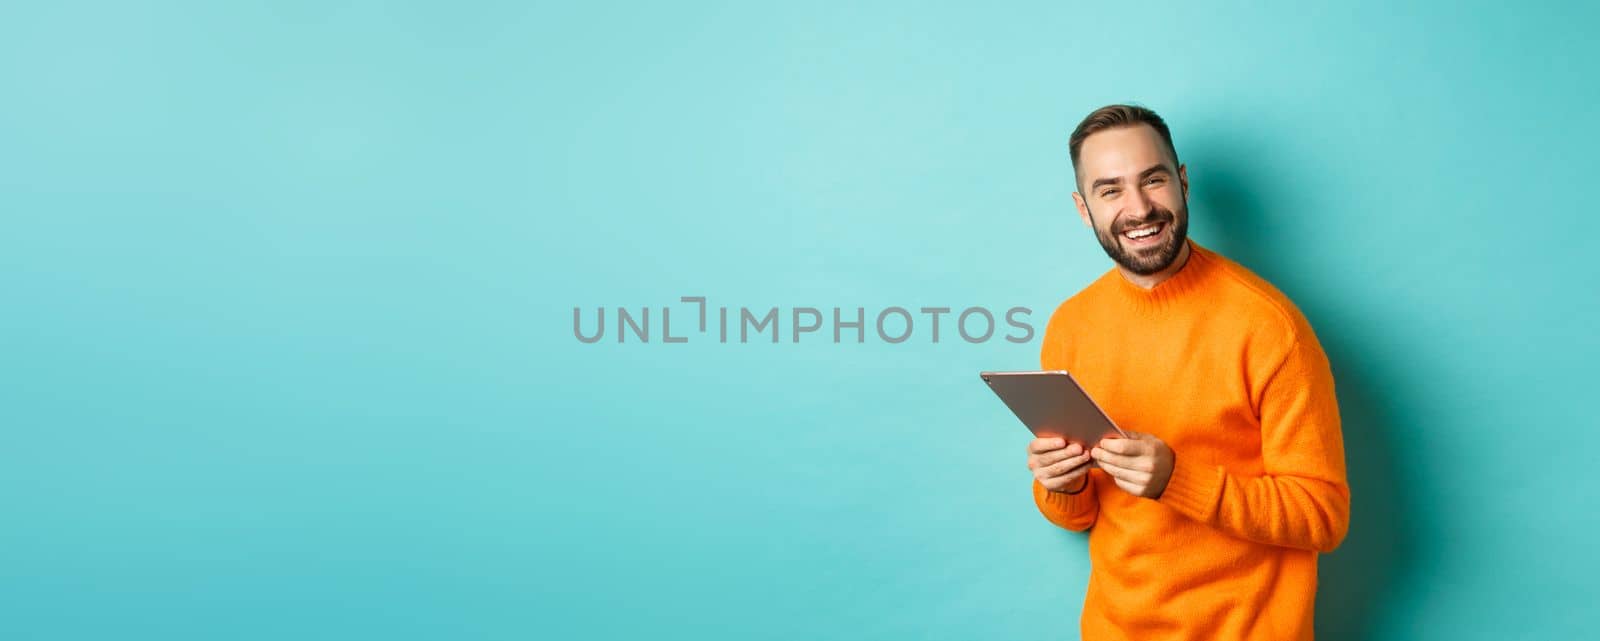 Handsome bearded man using digital tablet, laughing at camera, standing happy against light blue background.